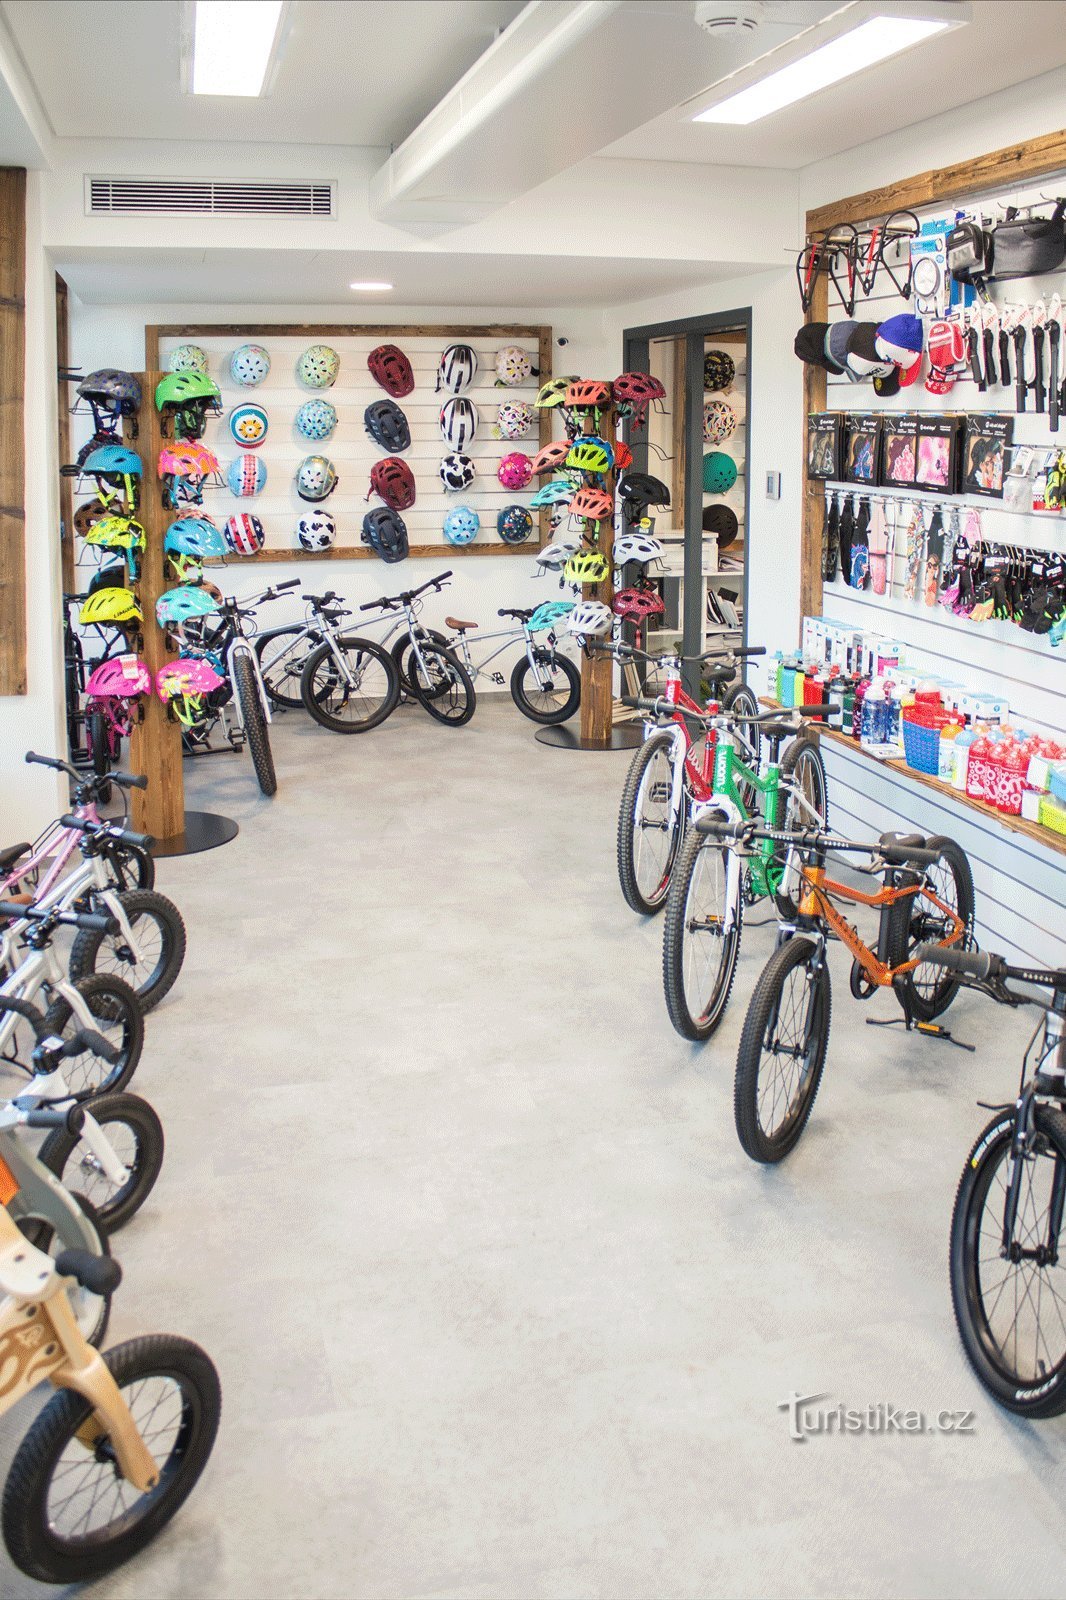 Bicycle shop, service and rental - Bicycle specialties